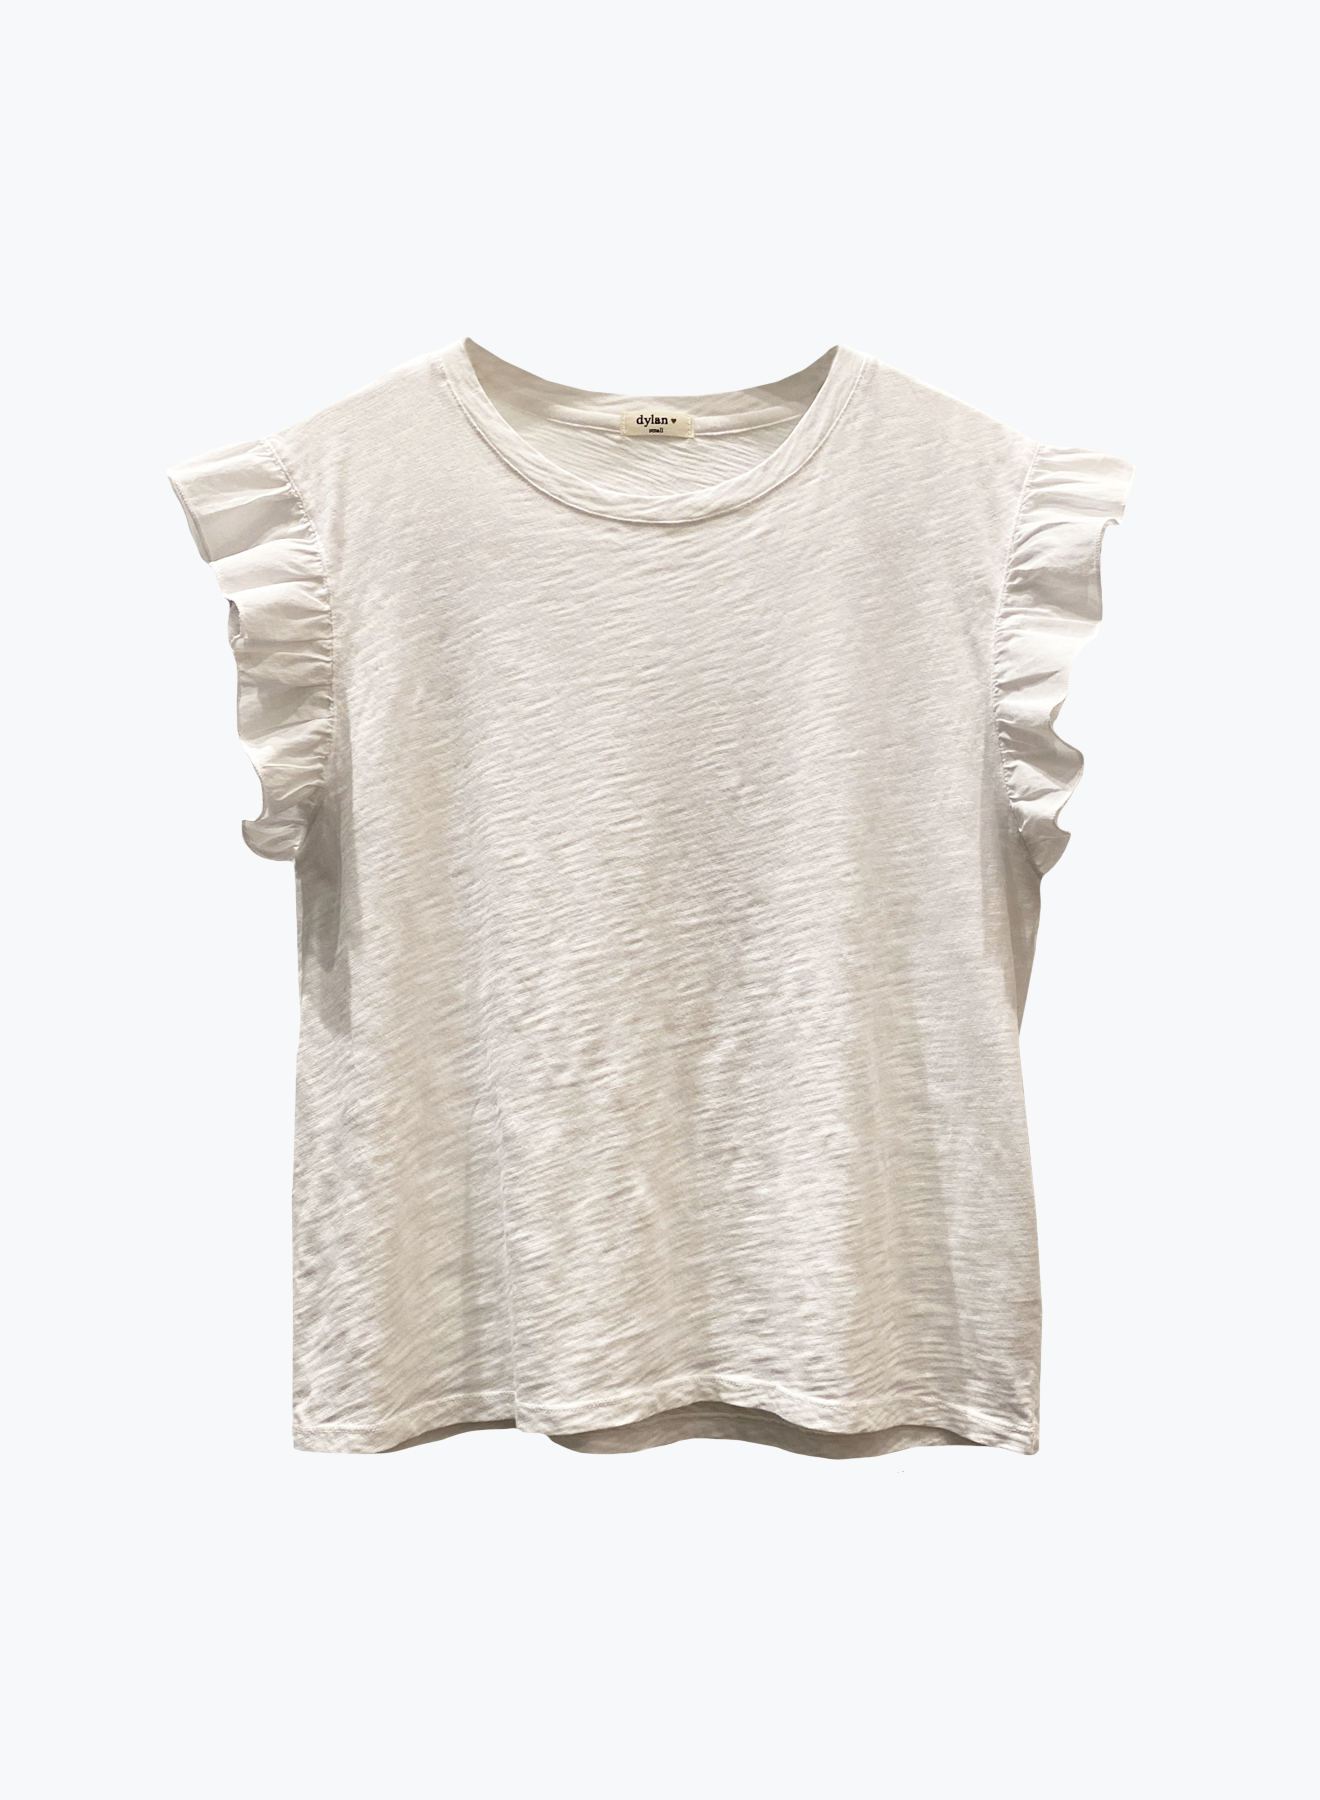 Poppy Tee with Ruffle Sleeves in white by Dylan